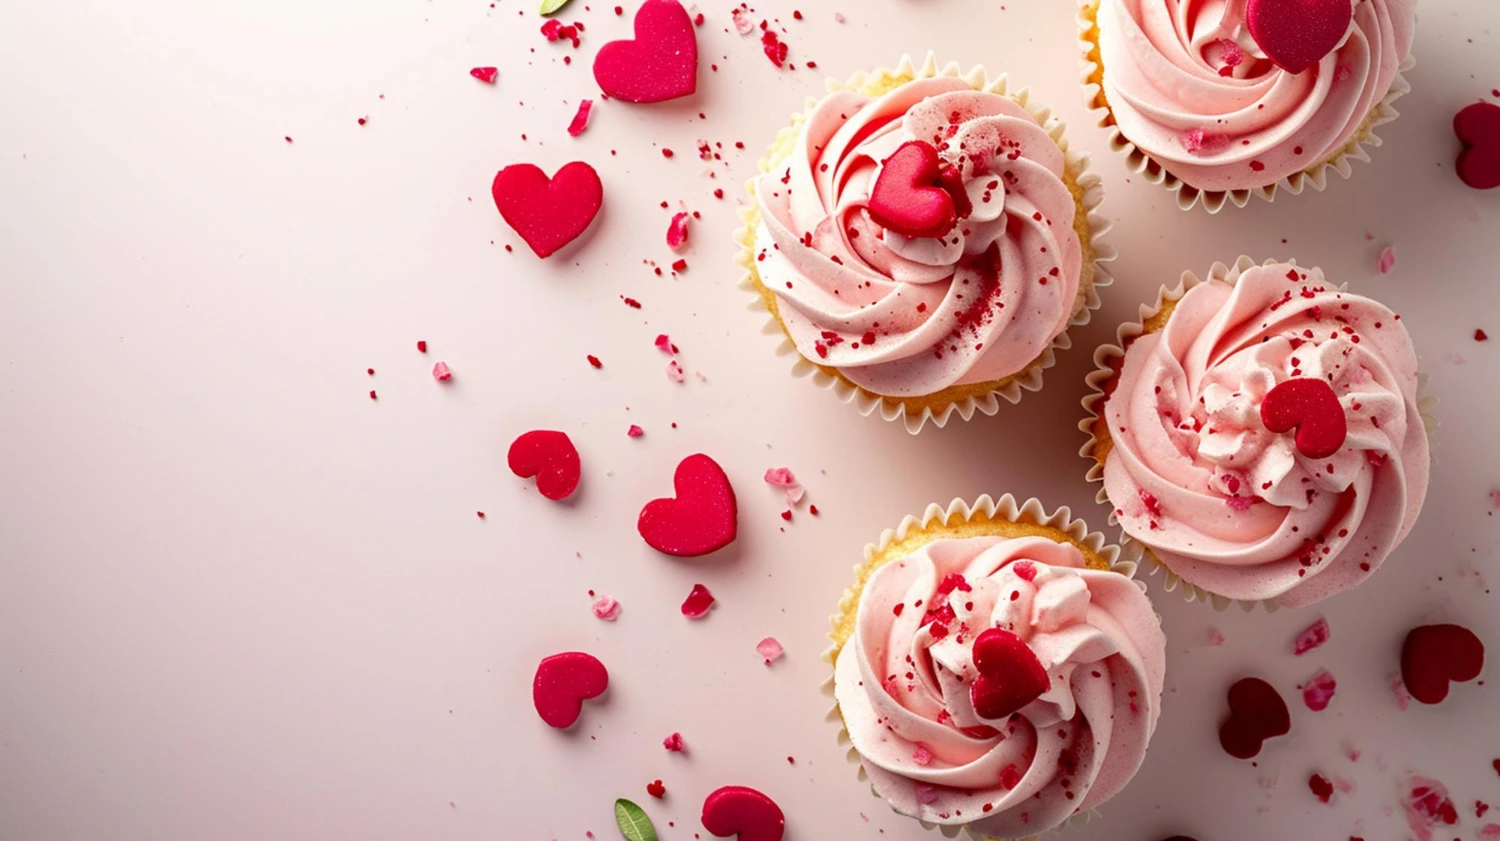 5 Yummy Valentine’s Day Cakes to Add Happiness to Your Celebration